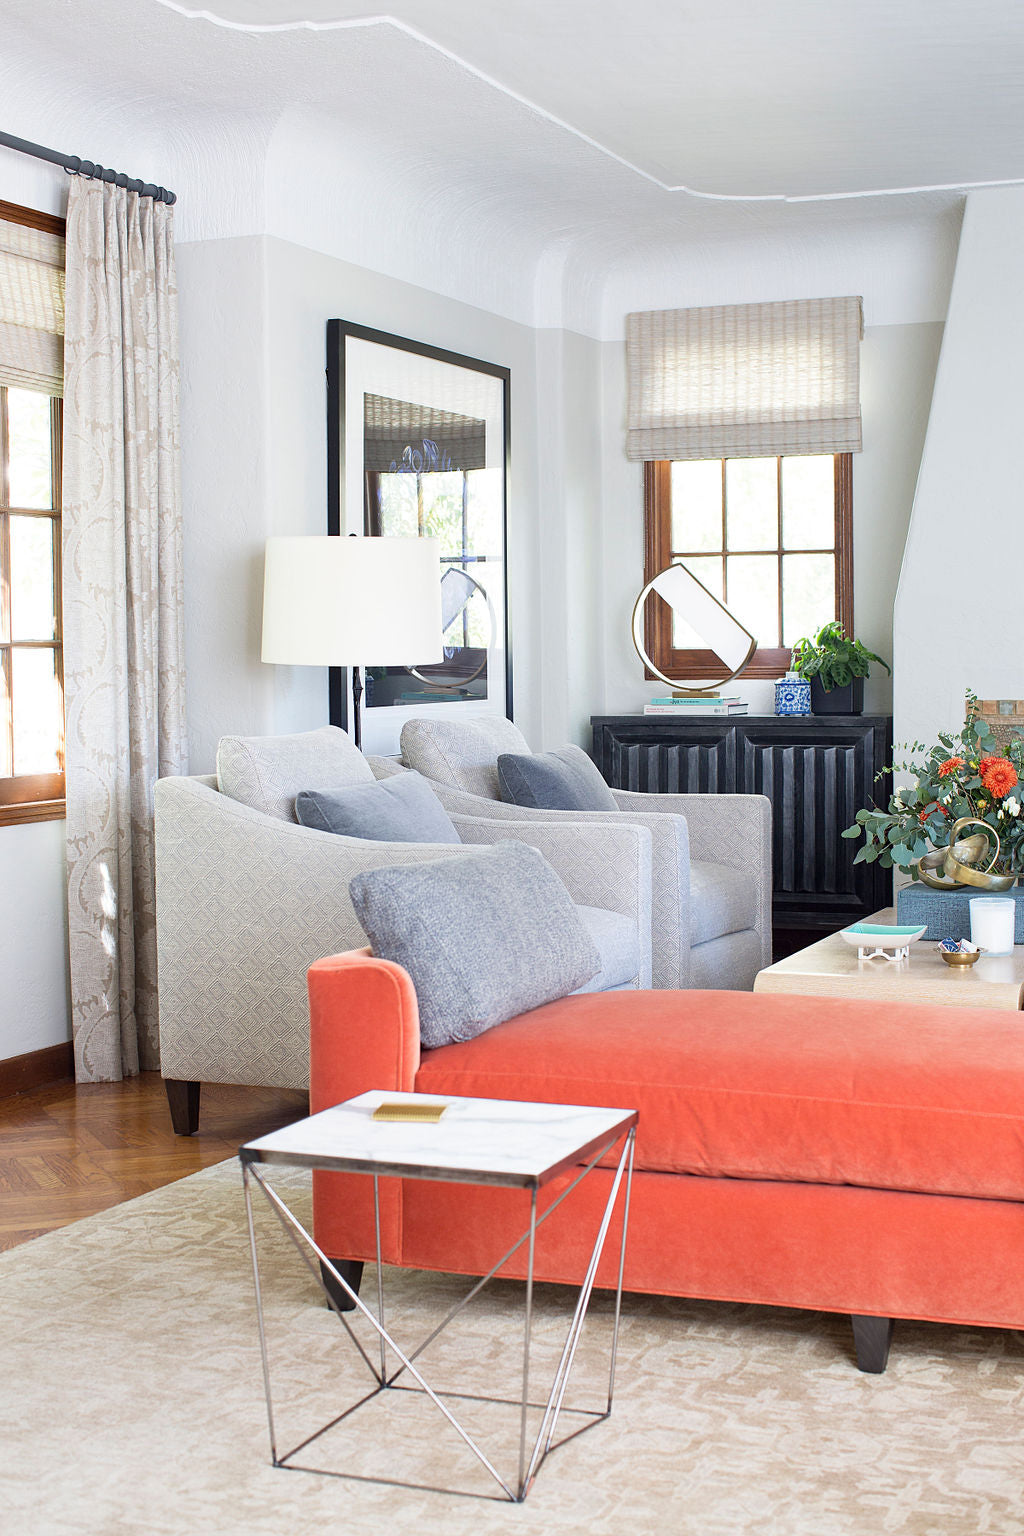 interior featuring two grey lounge chairs and salmon colored day bed